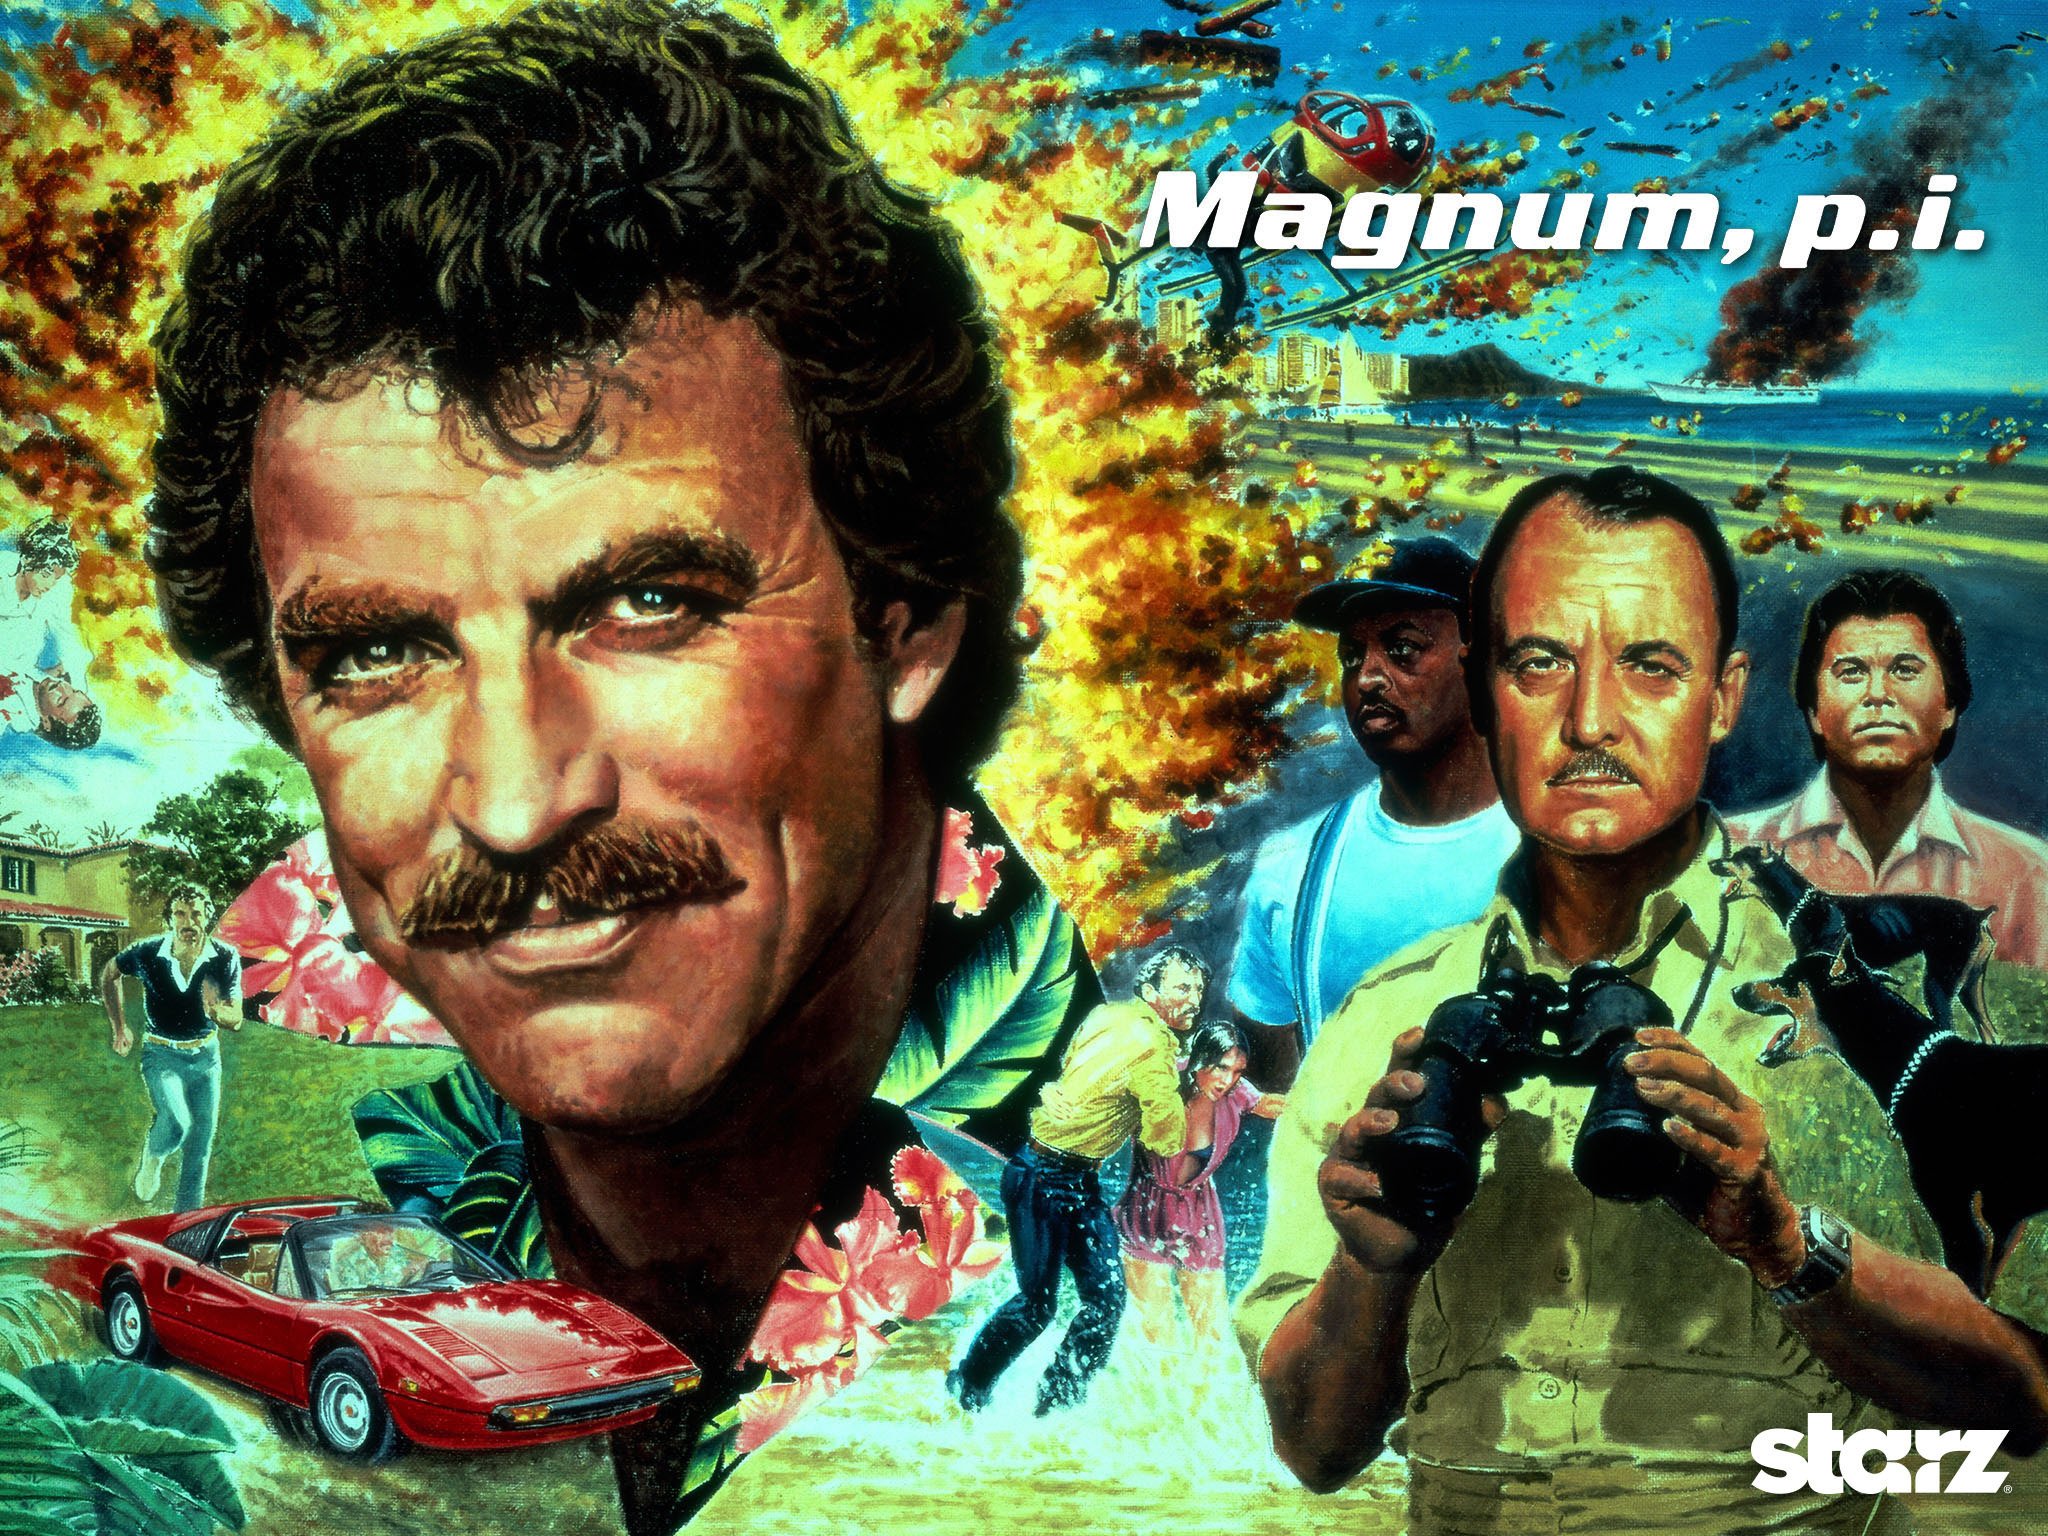 Reliving my teenage years on O'ahu, Hawaii, by watching Magnum P.I.